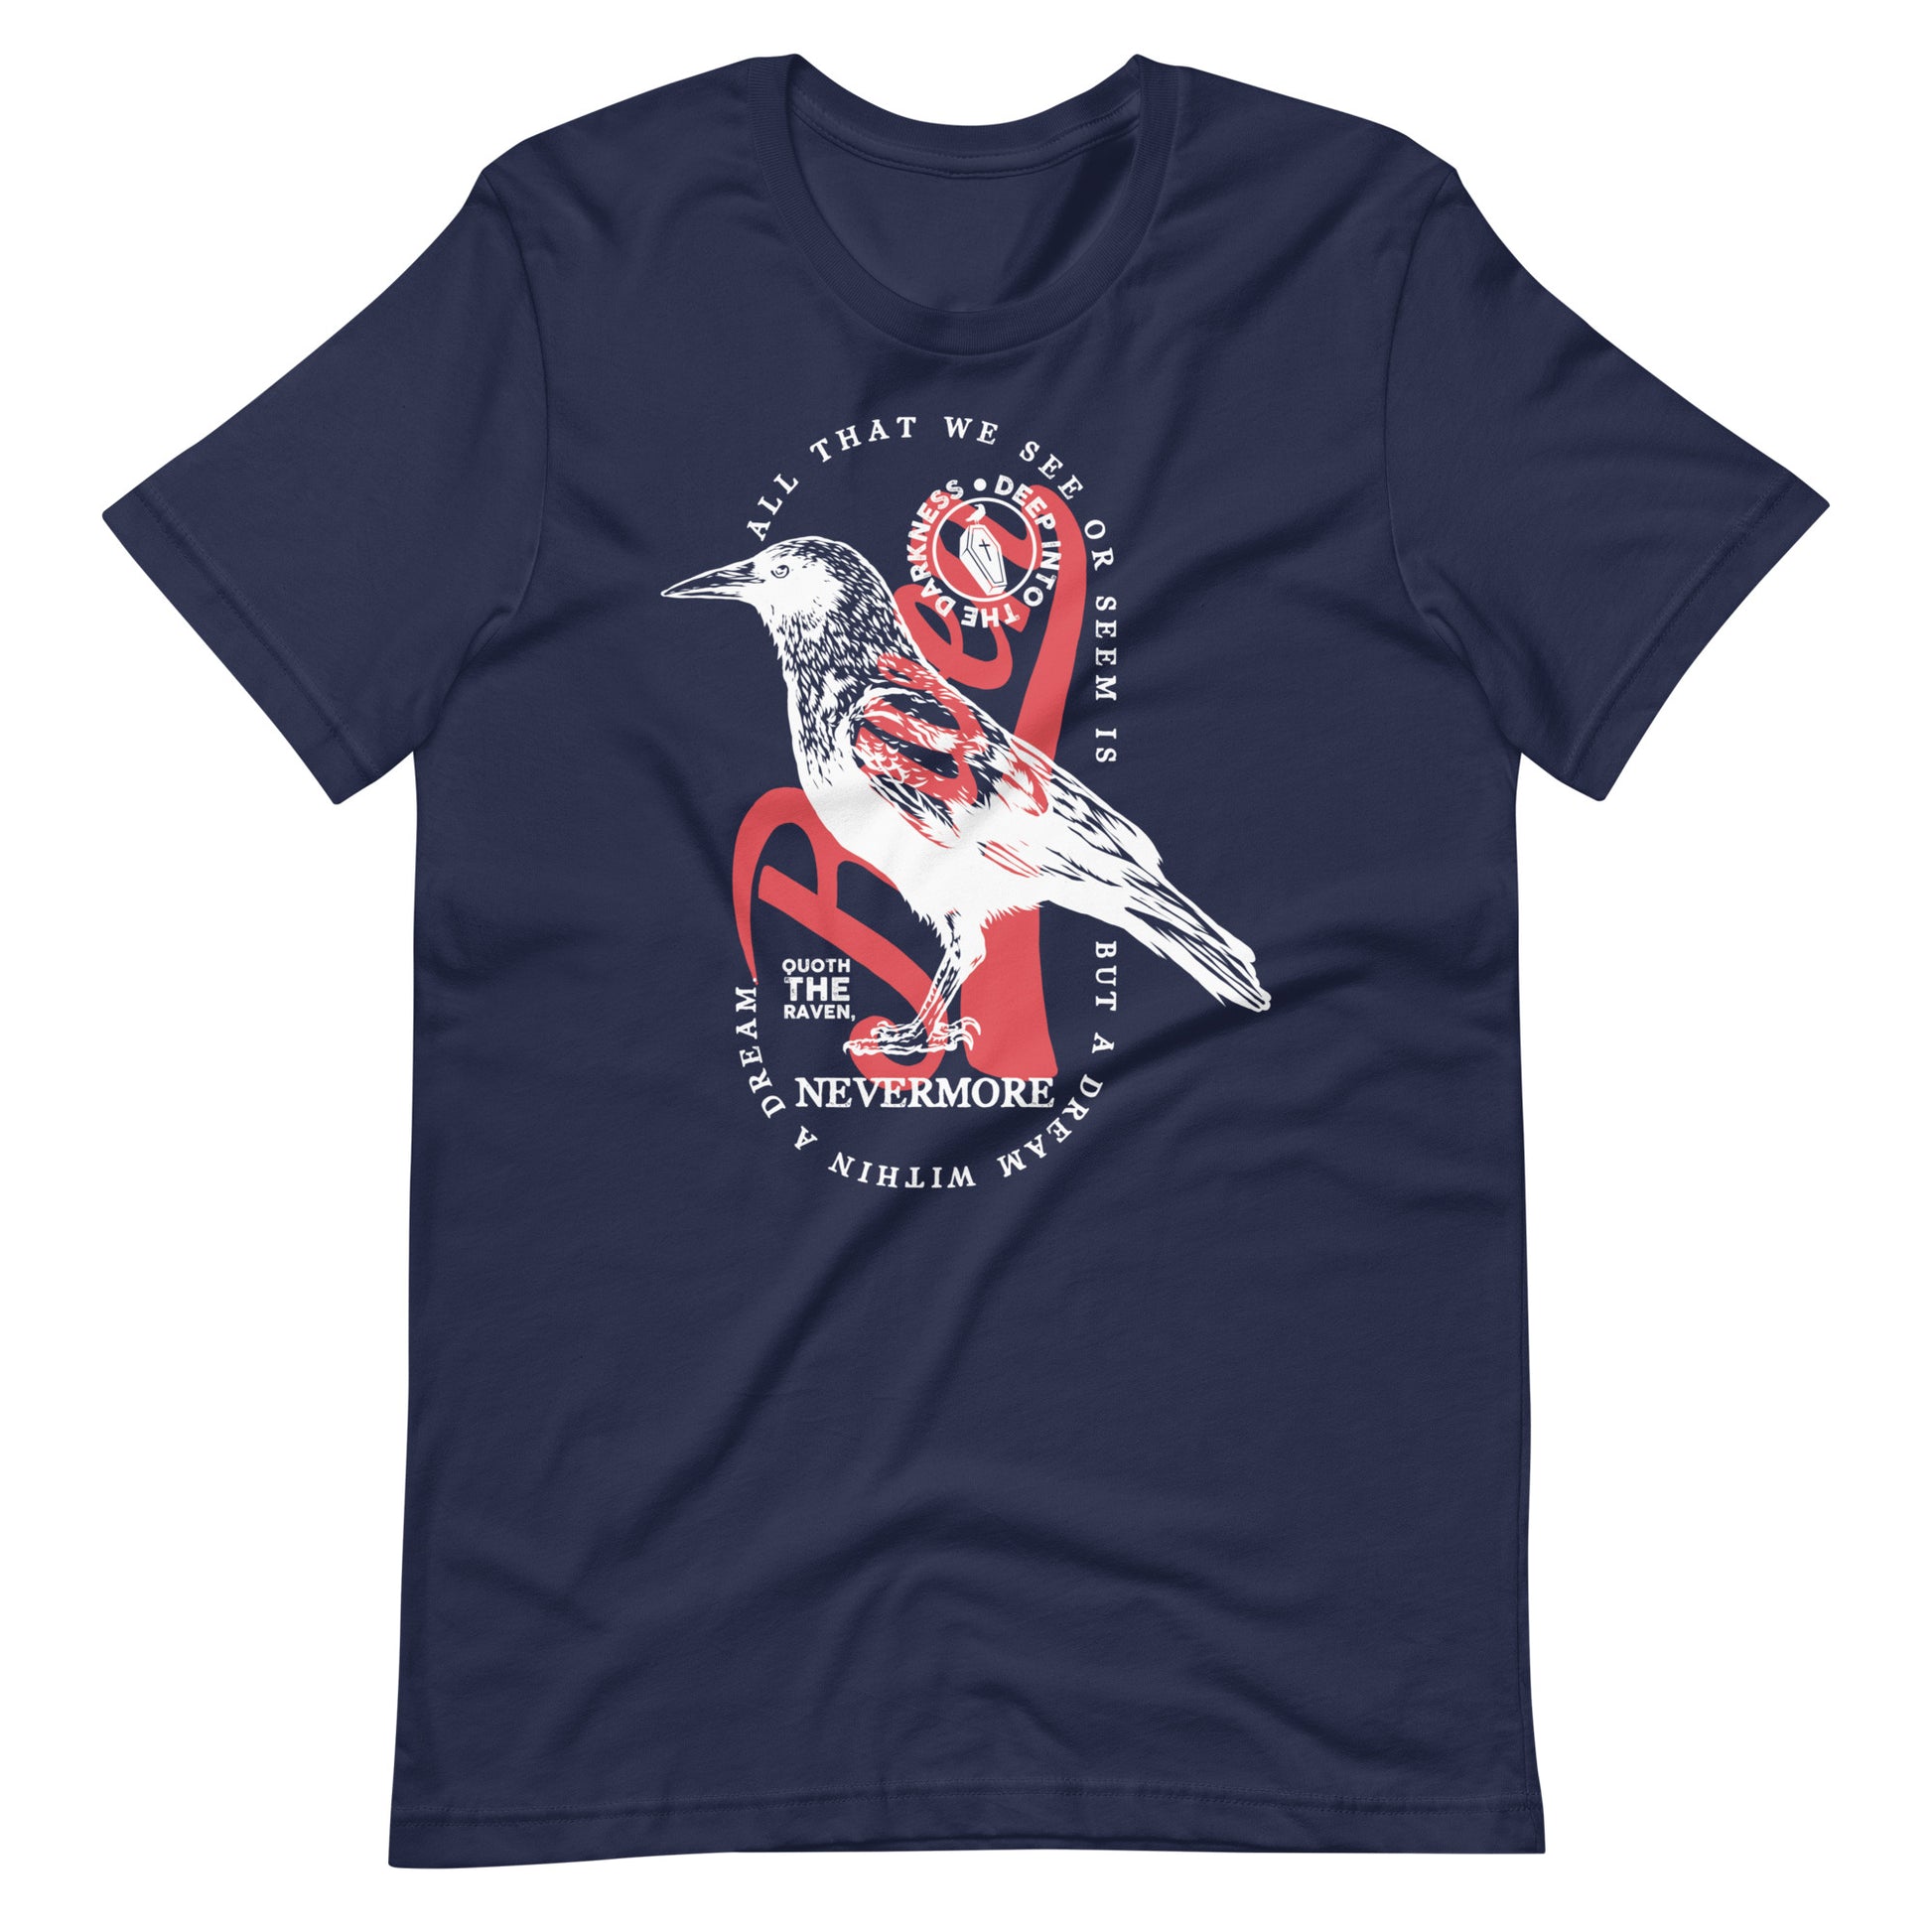 A Dream Within a Dream - Men's t-shirt - Navy Front